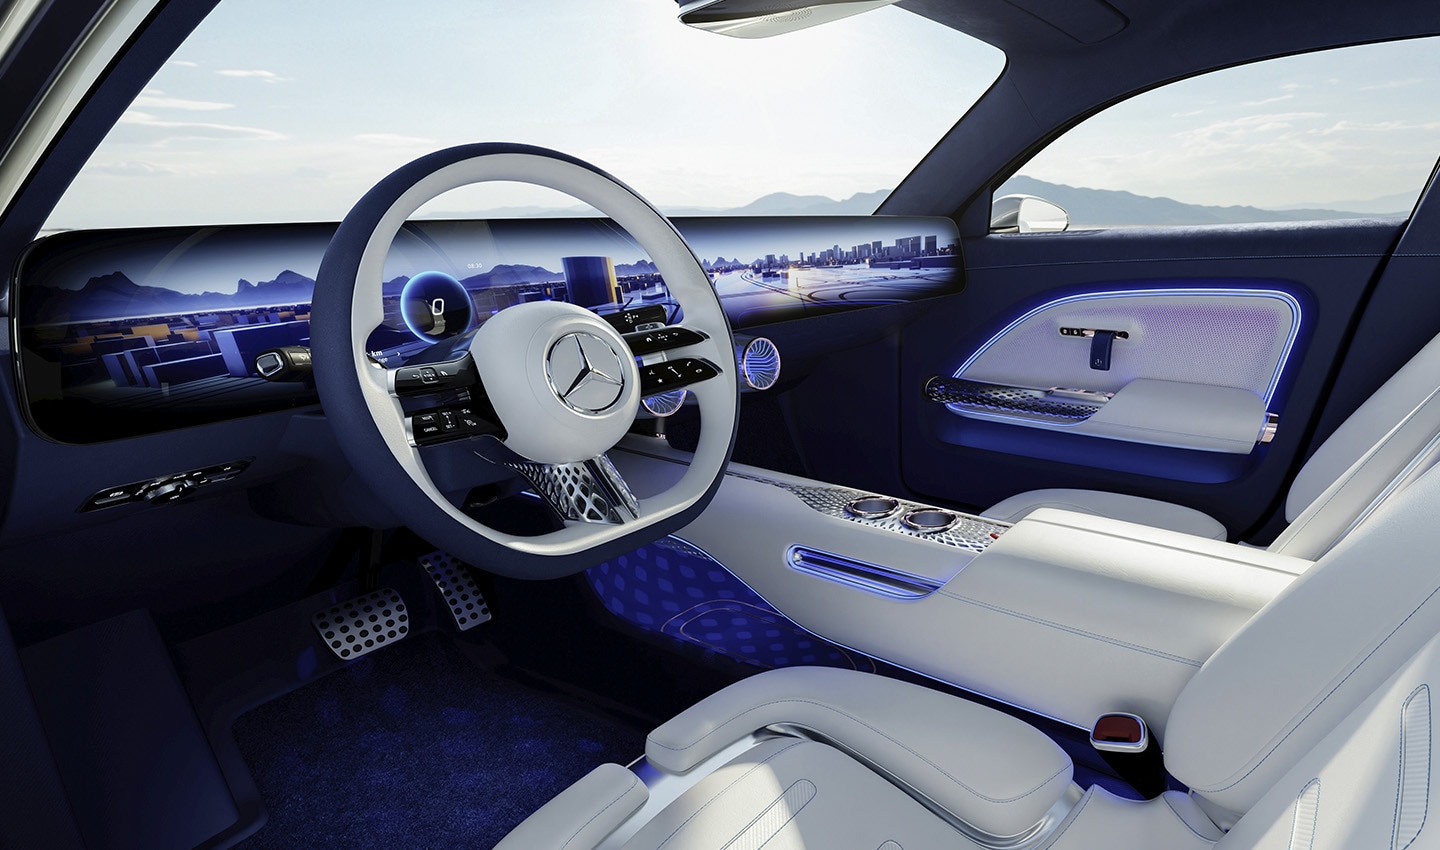 The Mercedes-Benz Vision EQXX takes the dashboard display to the next level. Seamless, wide and majestic.